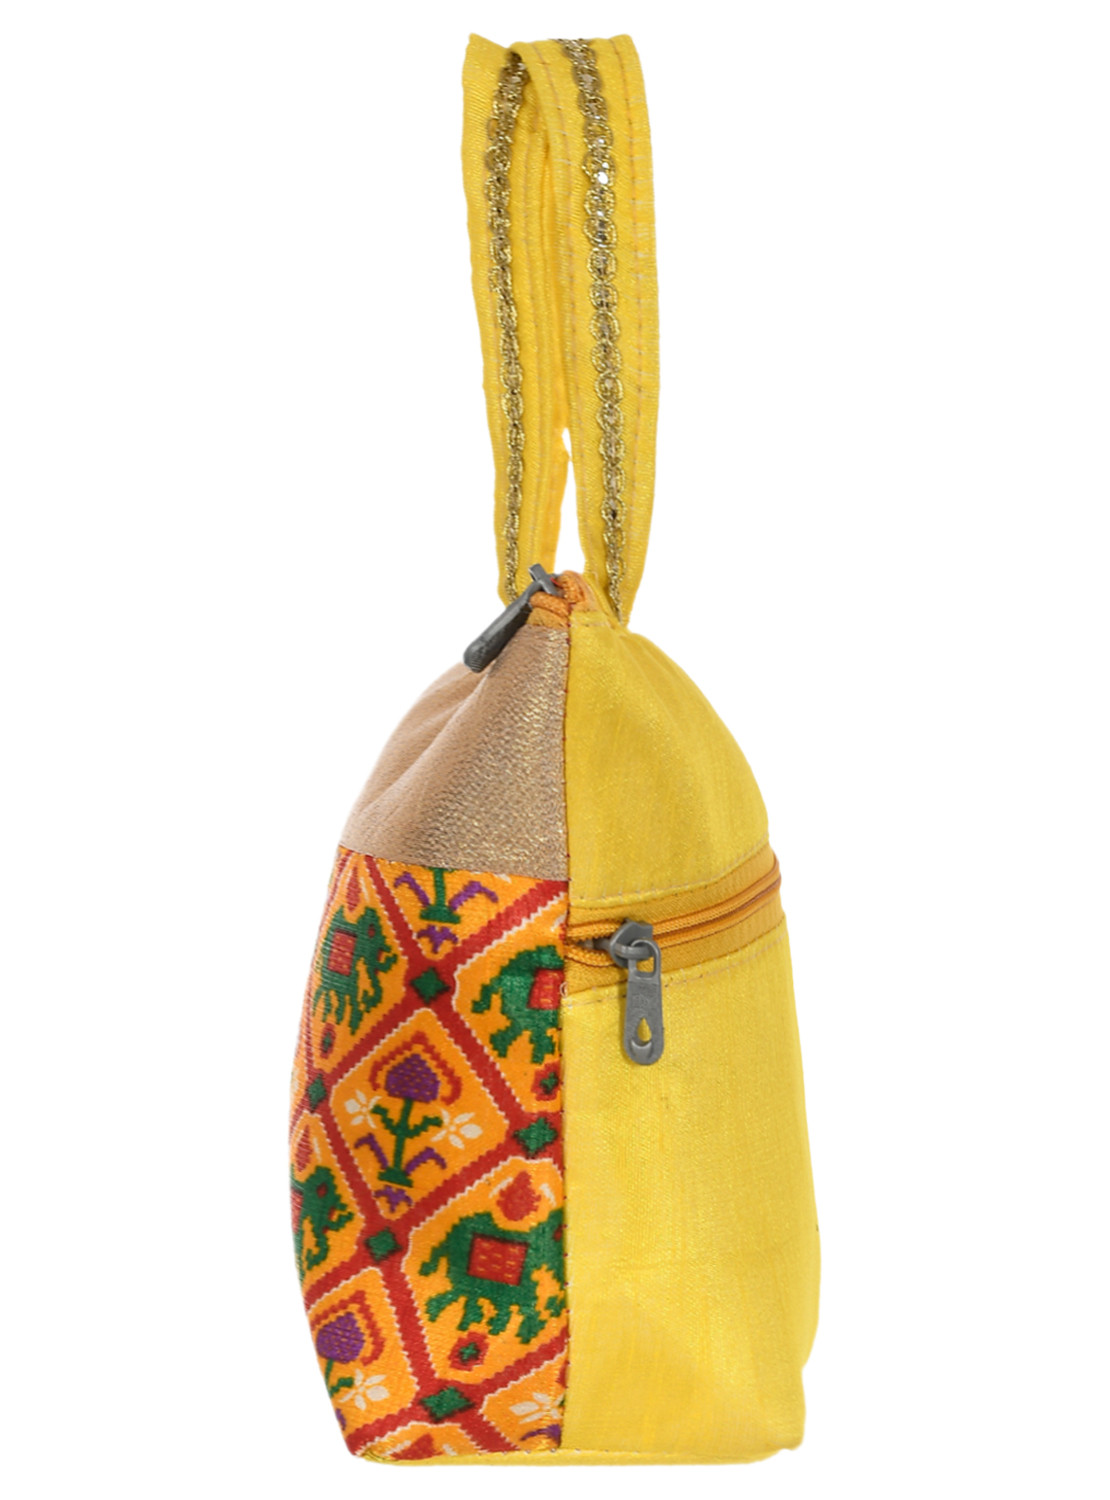 Kuber Industries Polyester Elephant Print Hand Bag For Women/Girls With Handle (Yellow) 54KM4035